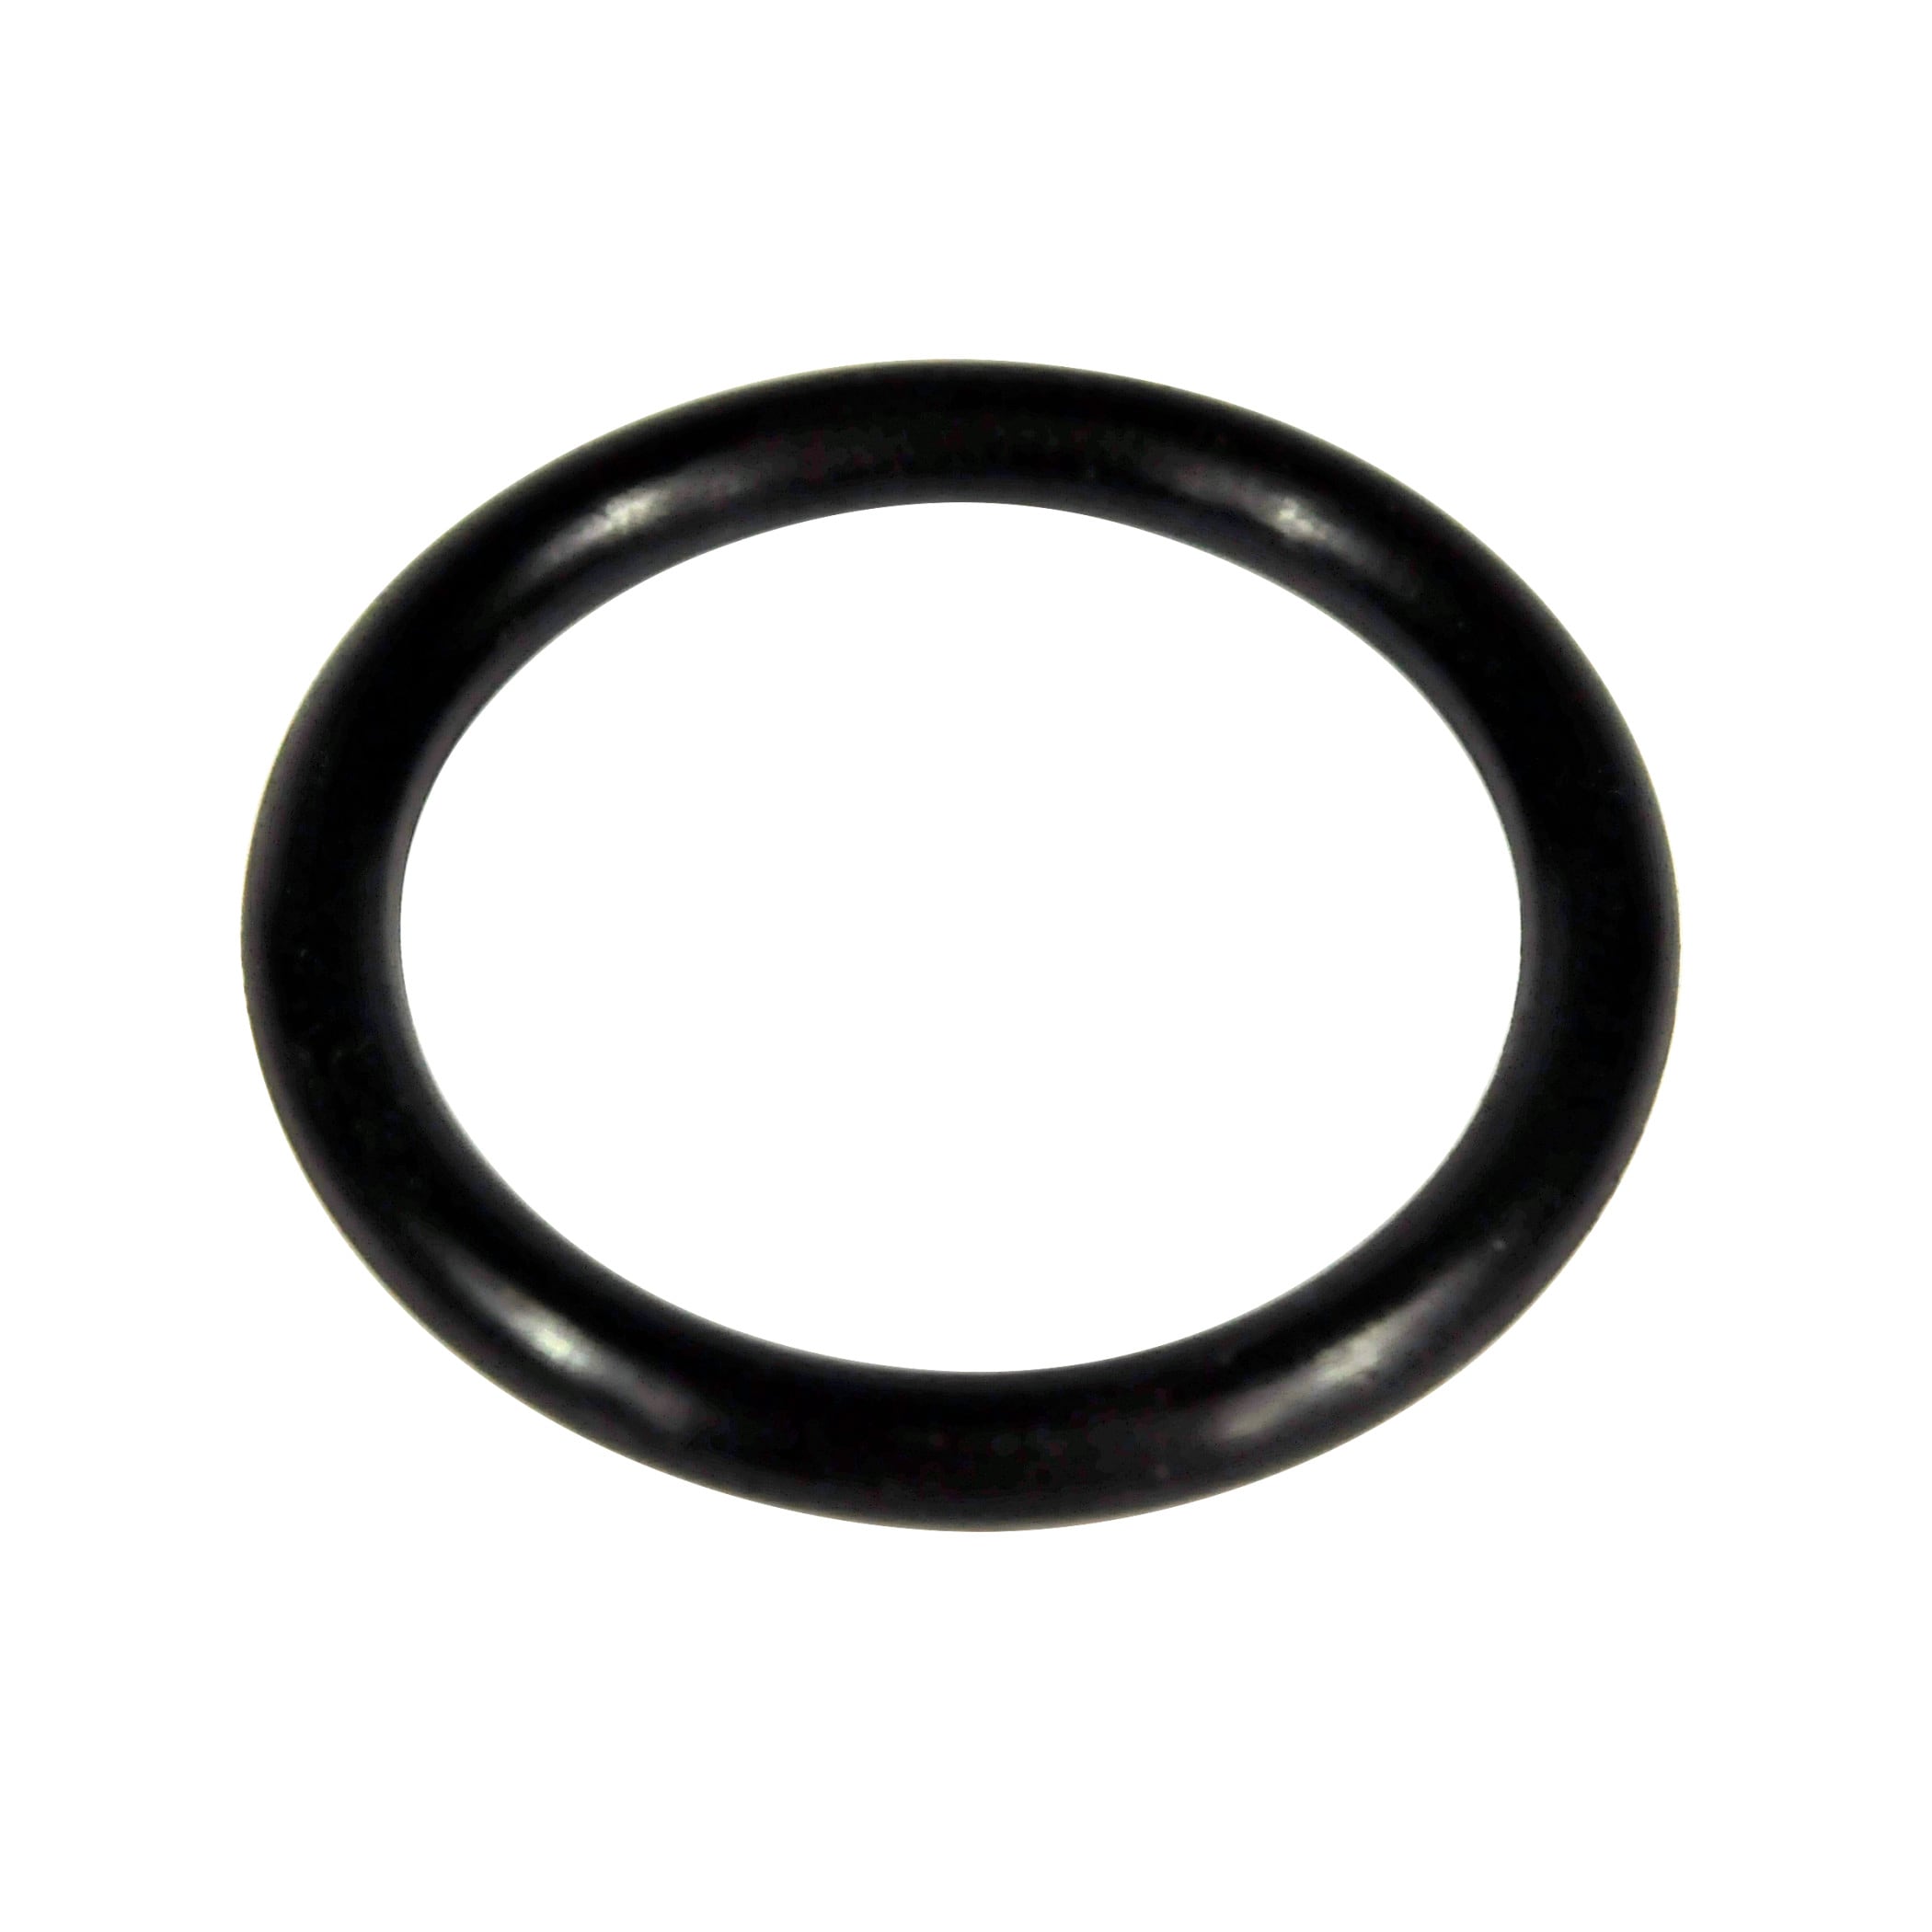 Danco 10-Pack 3/4-in x 3/32-in Rubber Faucet O-Ring in the Faucet